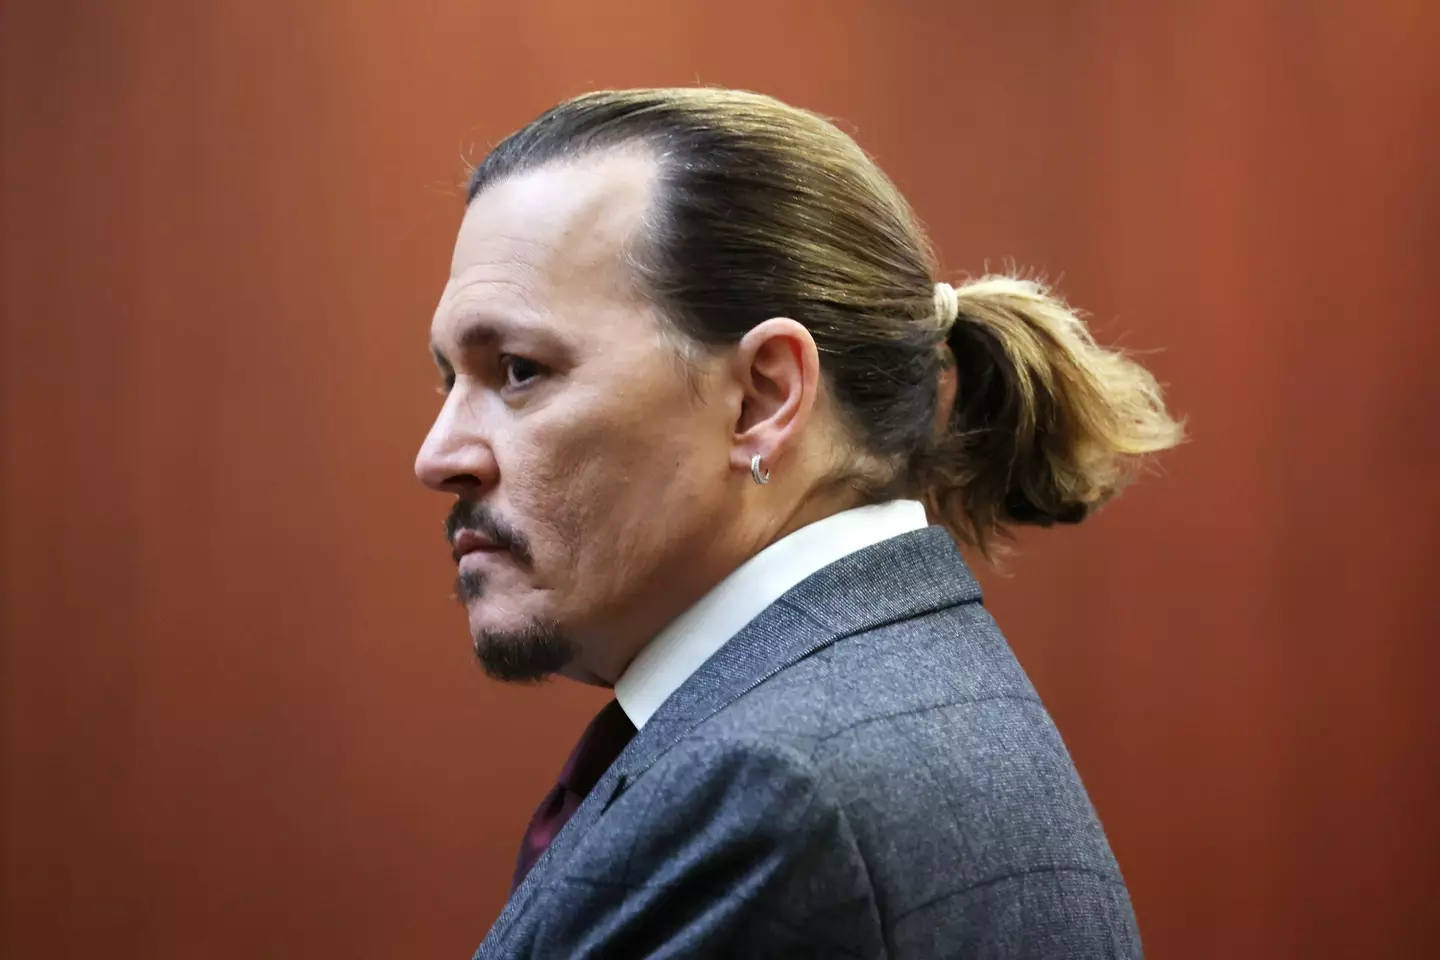 Travis McGivern testified he has never seen Depp physically abuse Amber Heard.